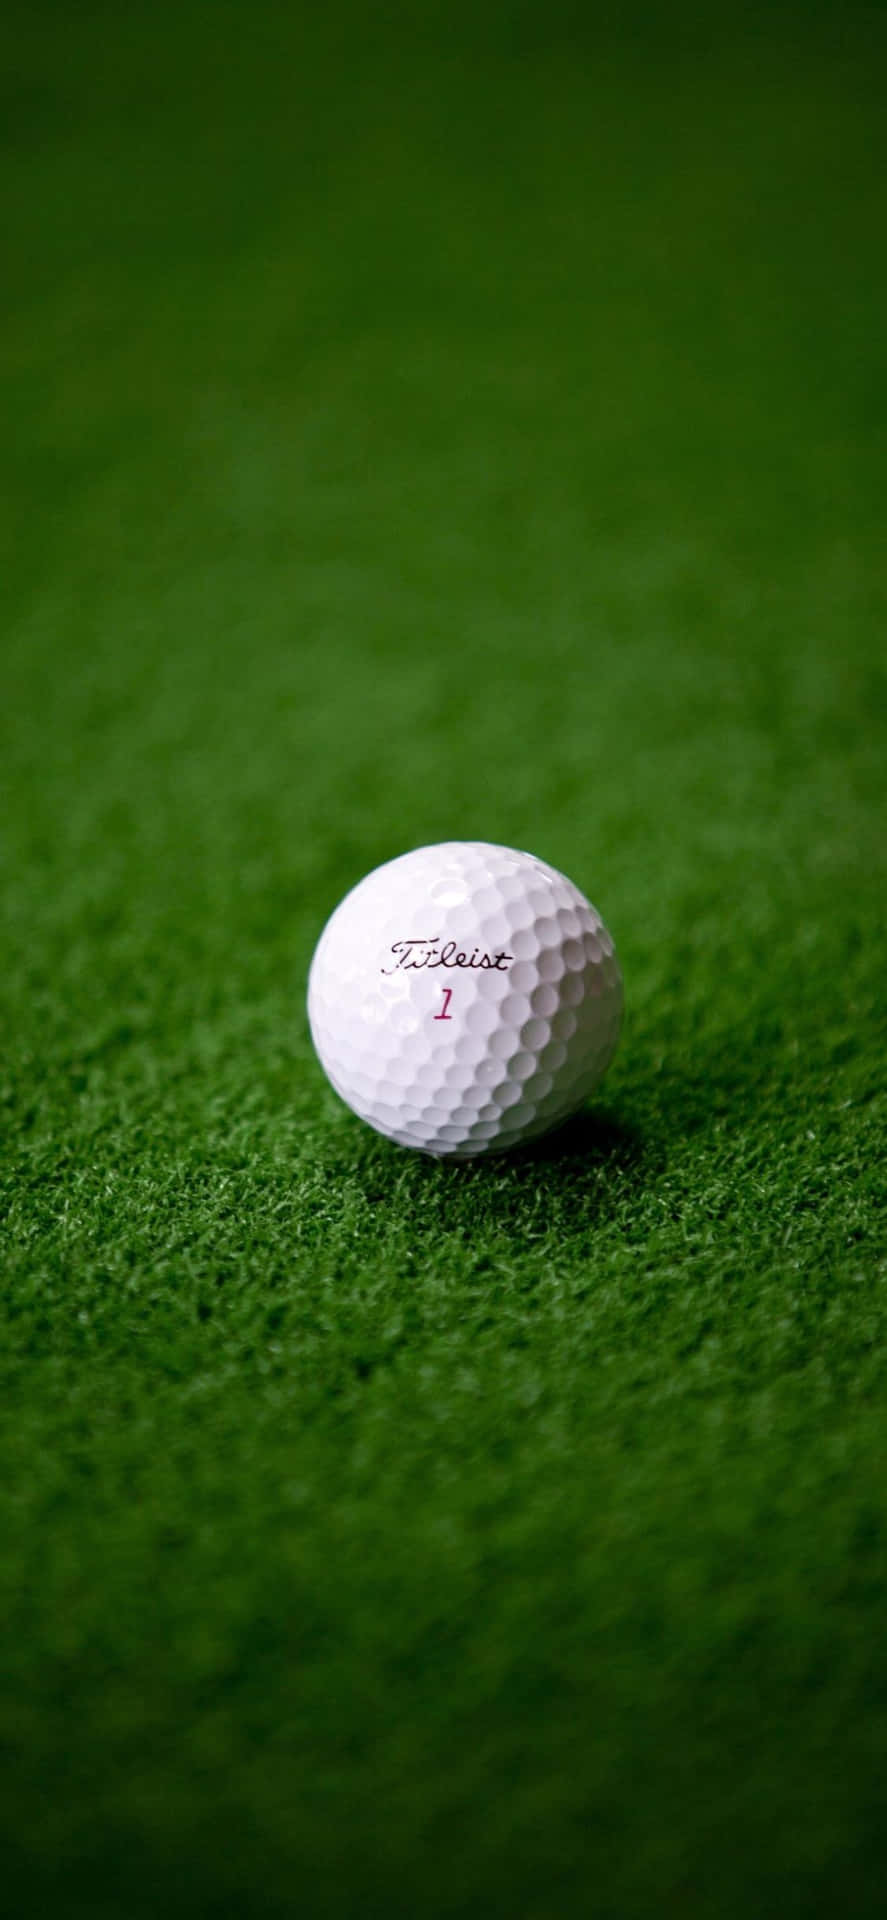 Iphone Xs Golf Background With A Golf Ball